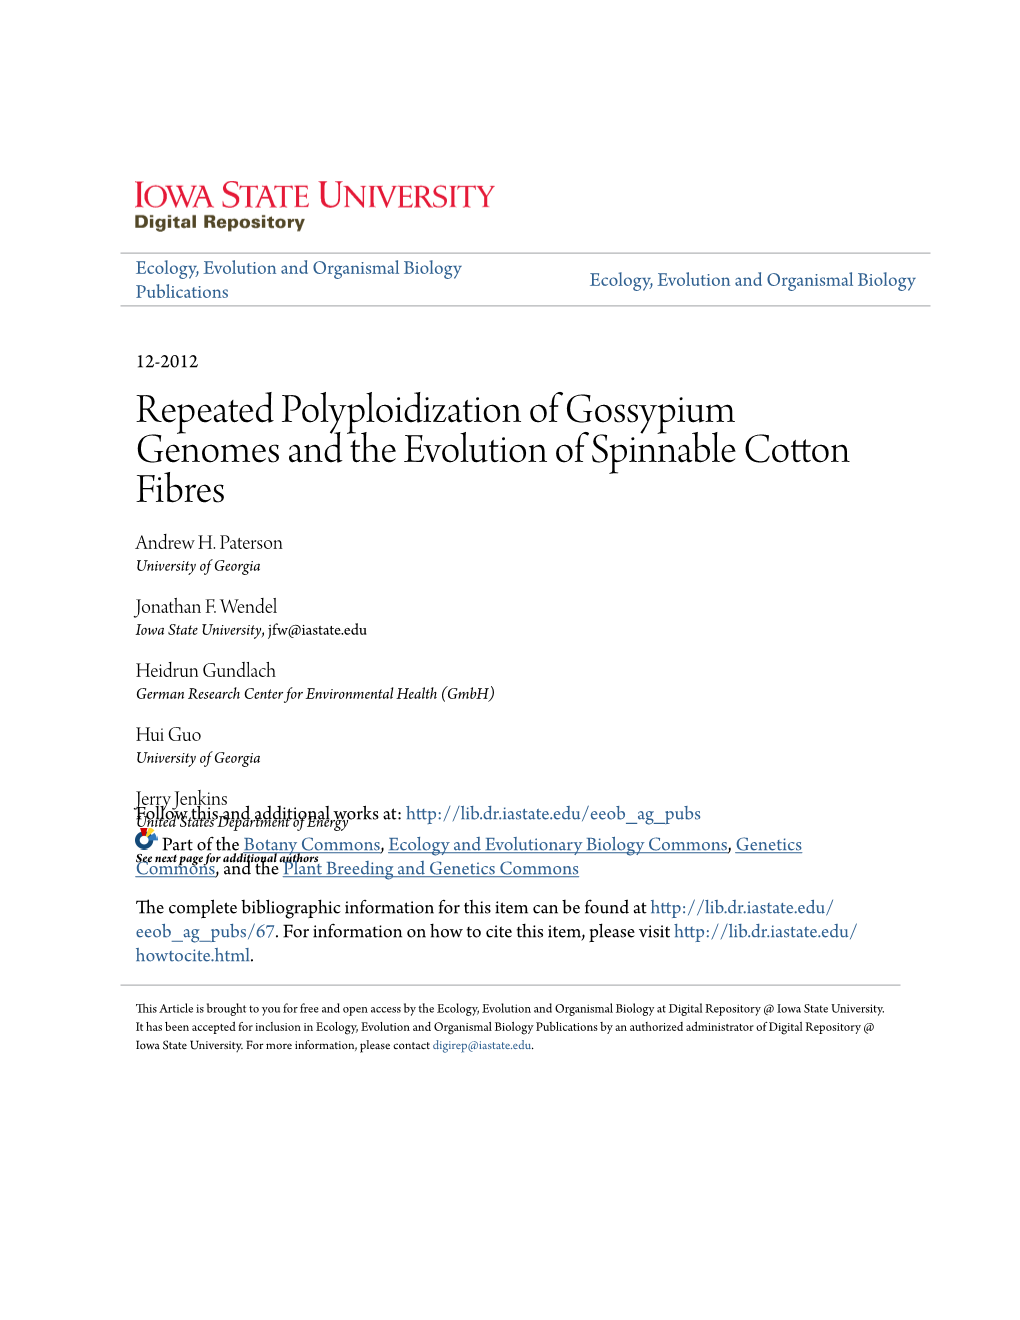 Repeated Polyploidization of Gossypium Genomes and the Evolution of Spinnable Cotton Fibres Andrew H